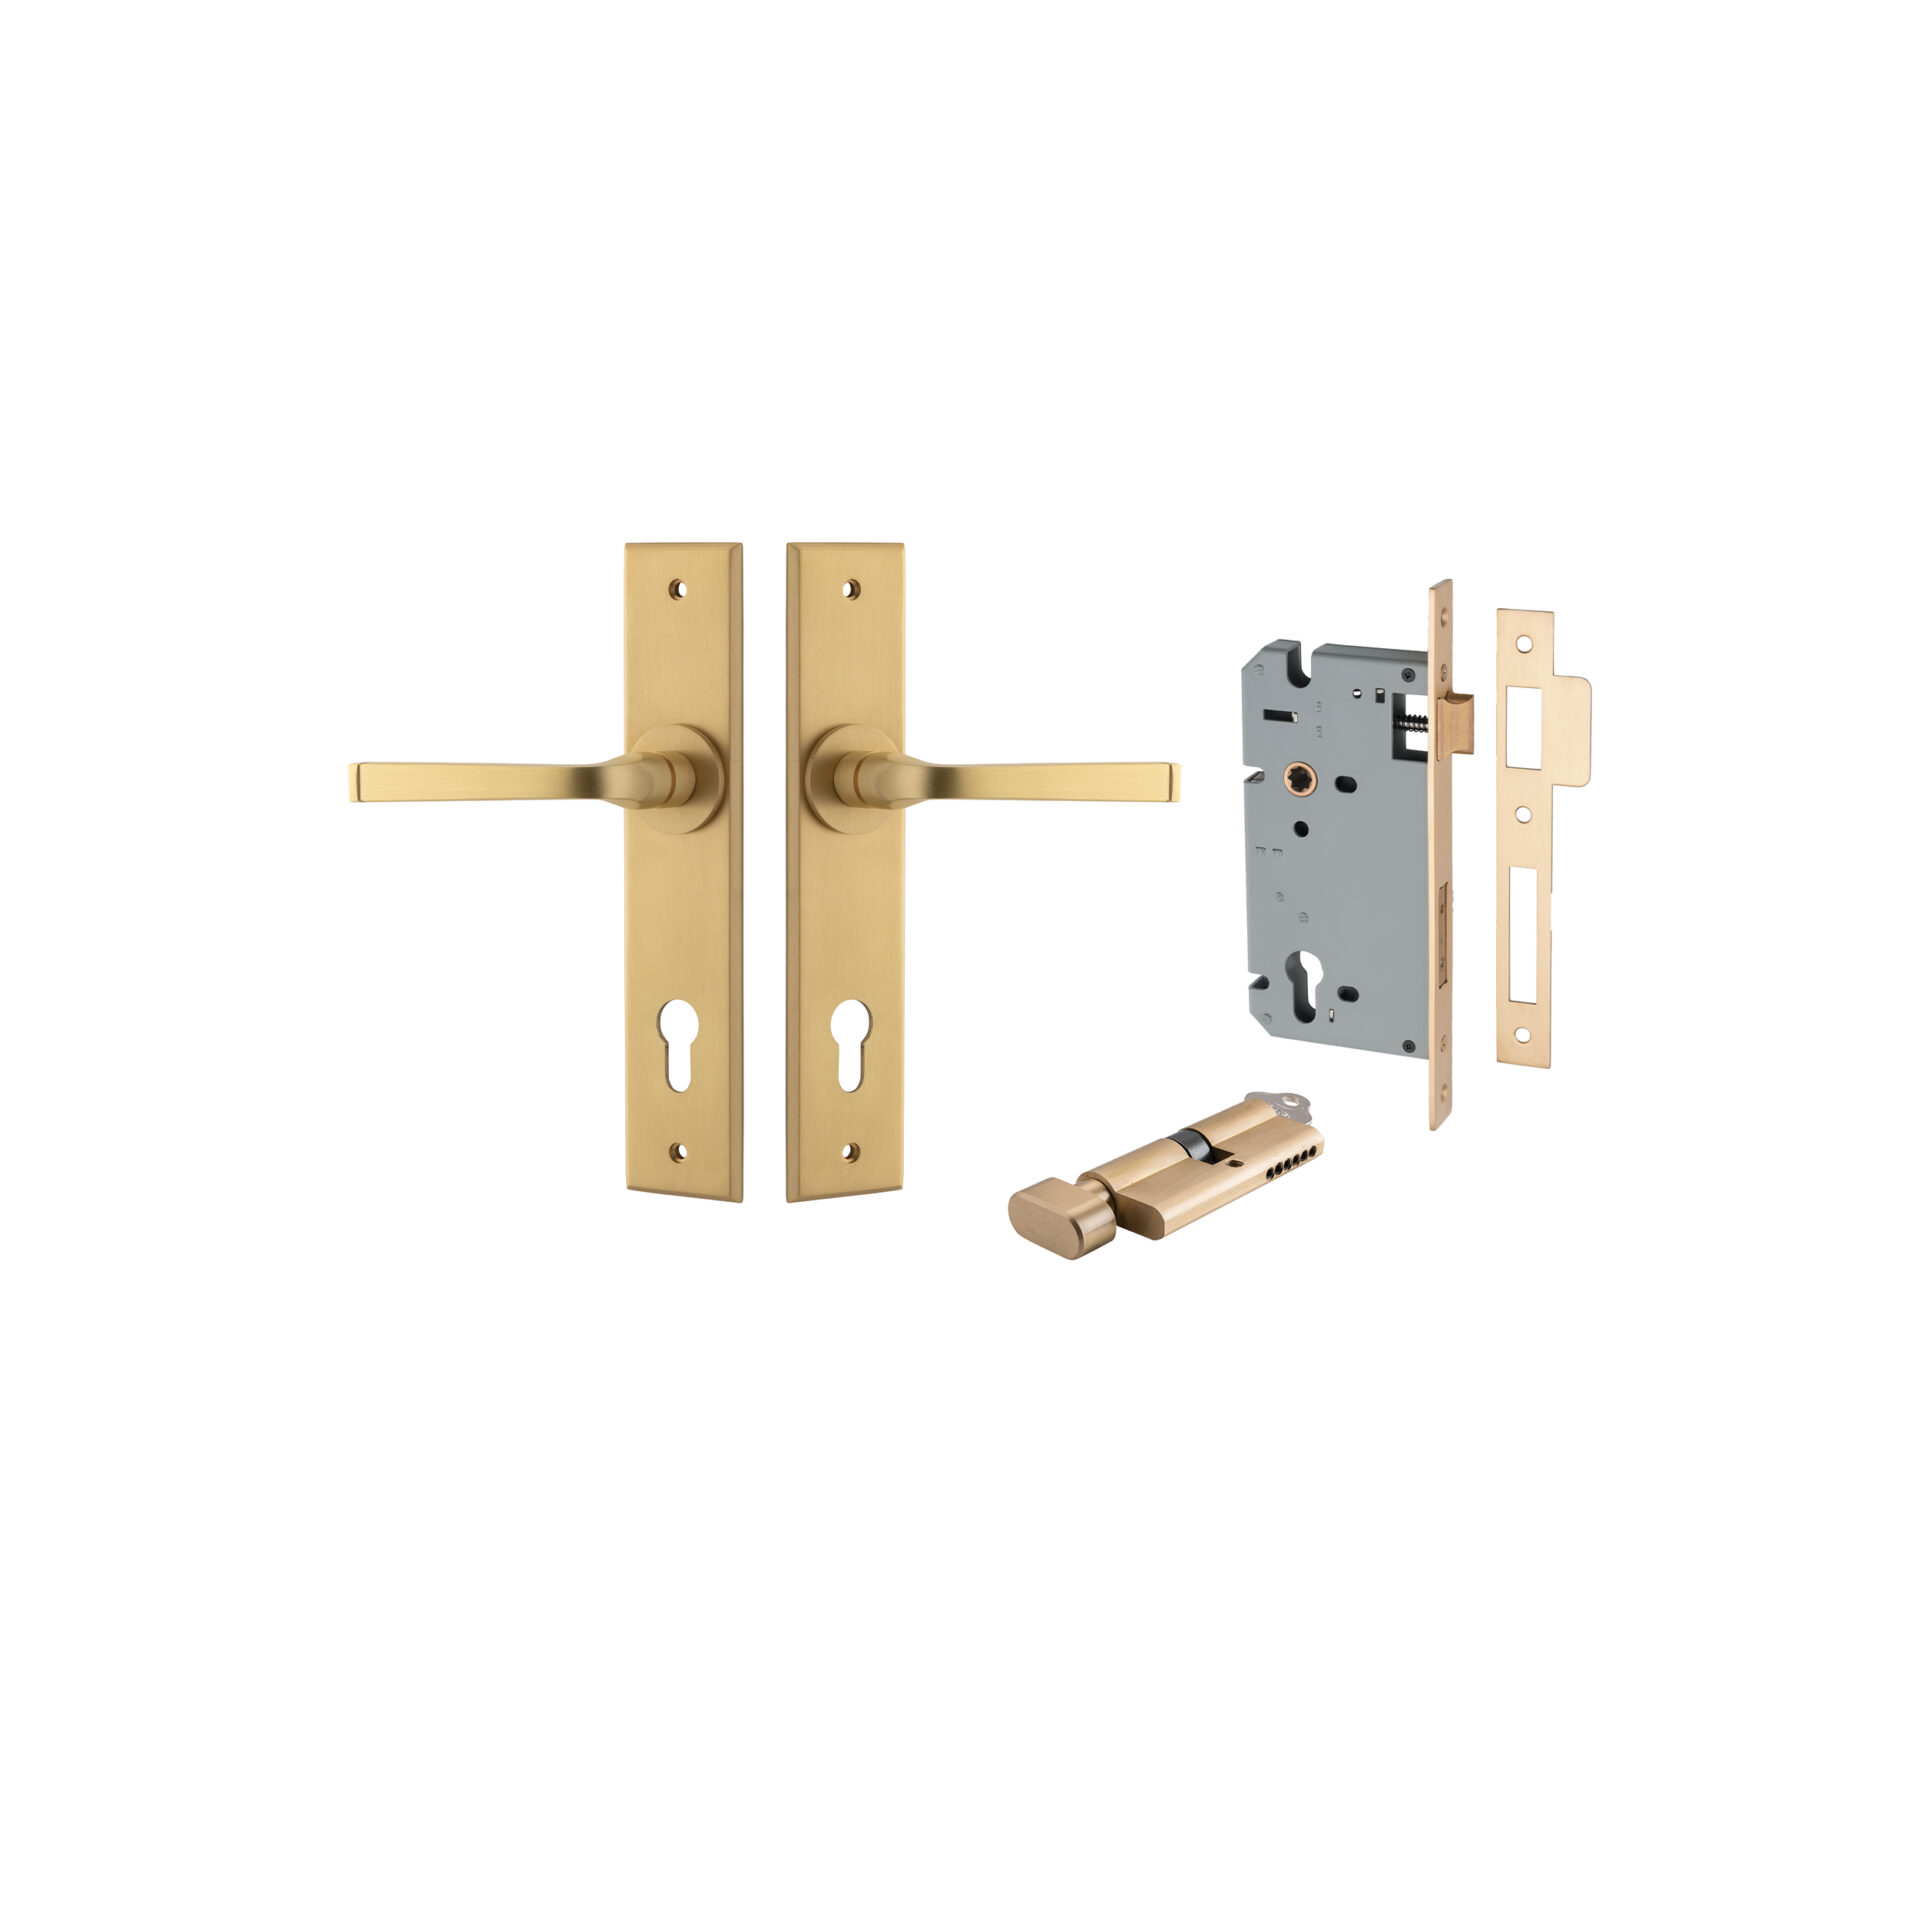 15288KENTR60KT - Annecy Lever - Chamfered Backplate Entrance Kit with High Security Lock - Brushed Brass - Entrance